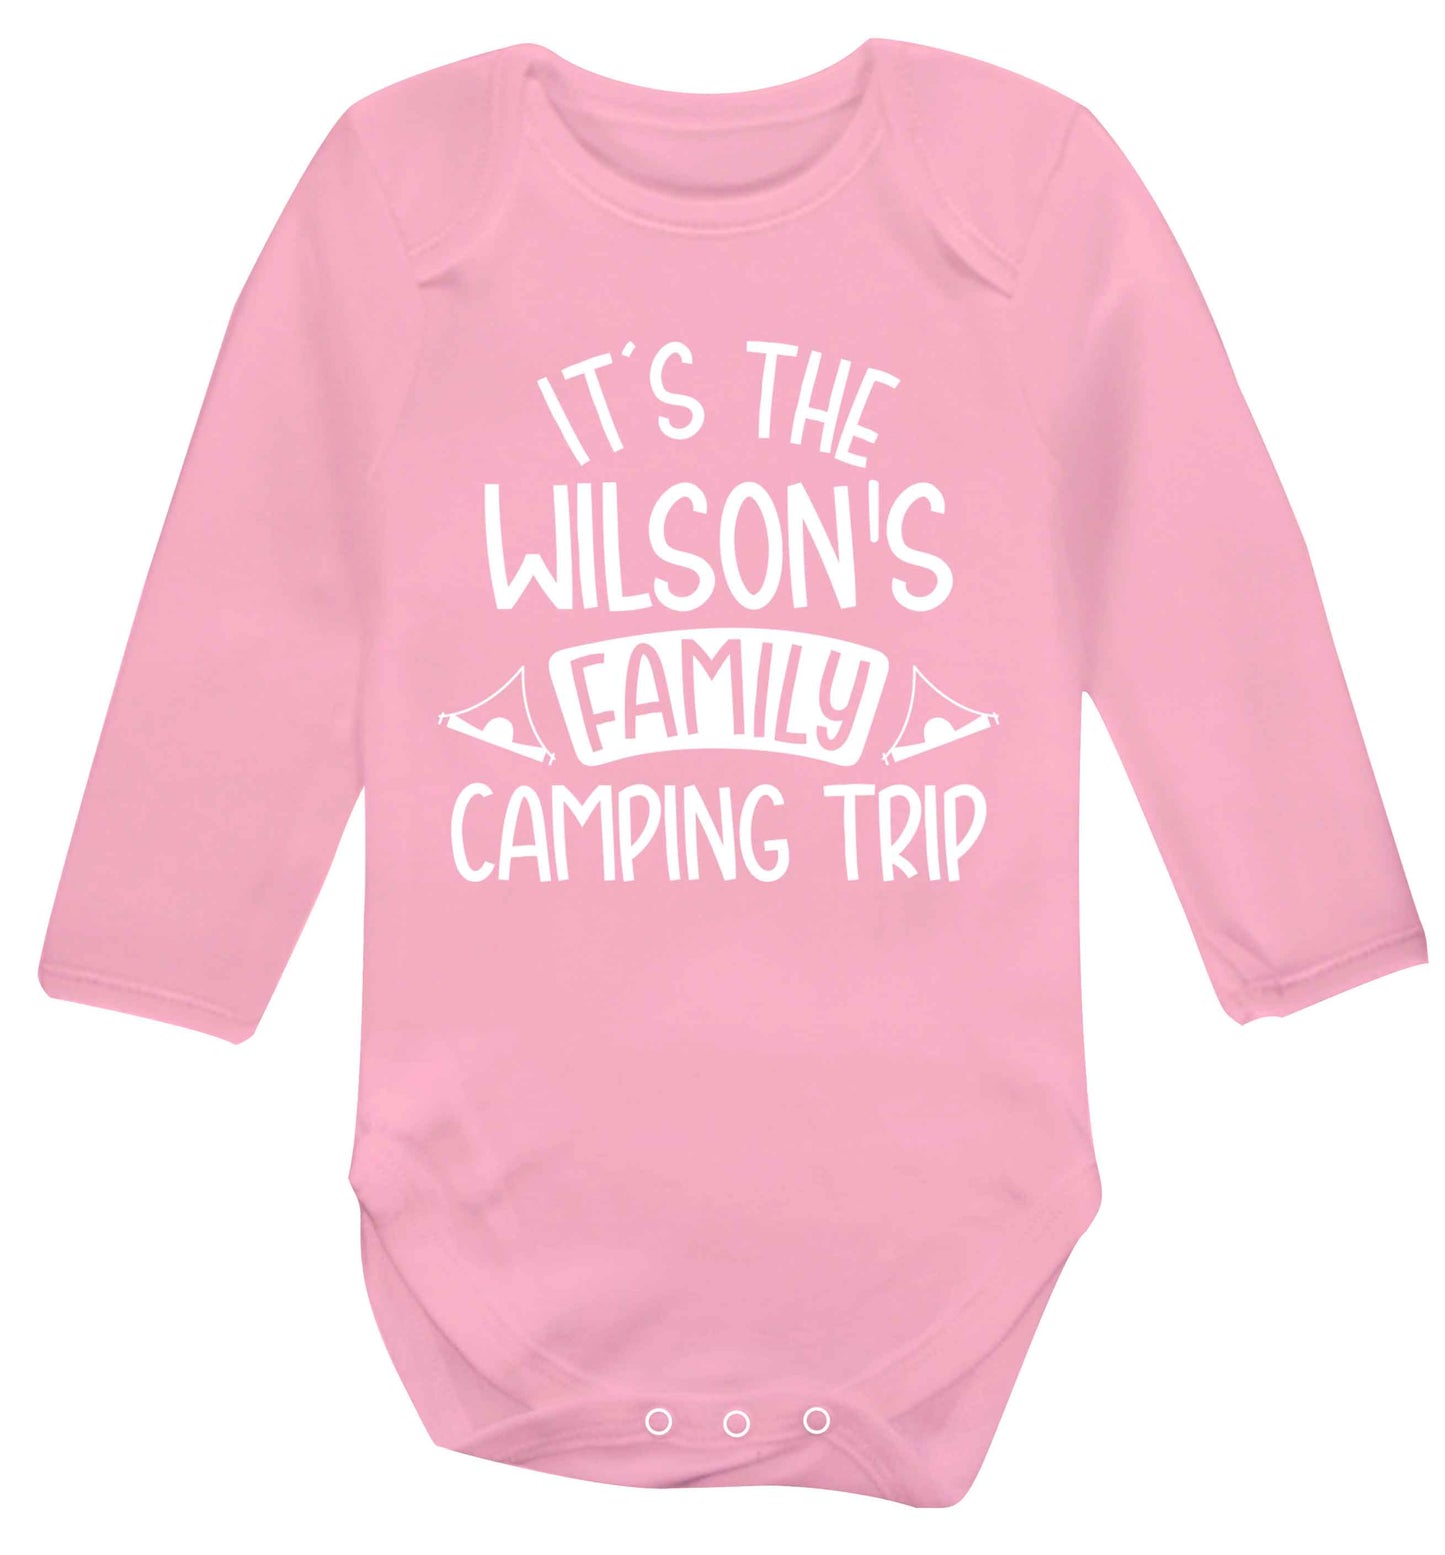 It's the Wilson's family camping trip personalised Baby Vest long sleeved pale pink 6-12 months